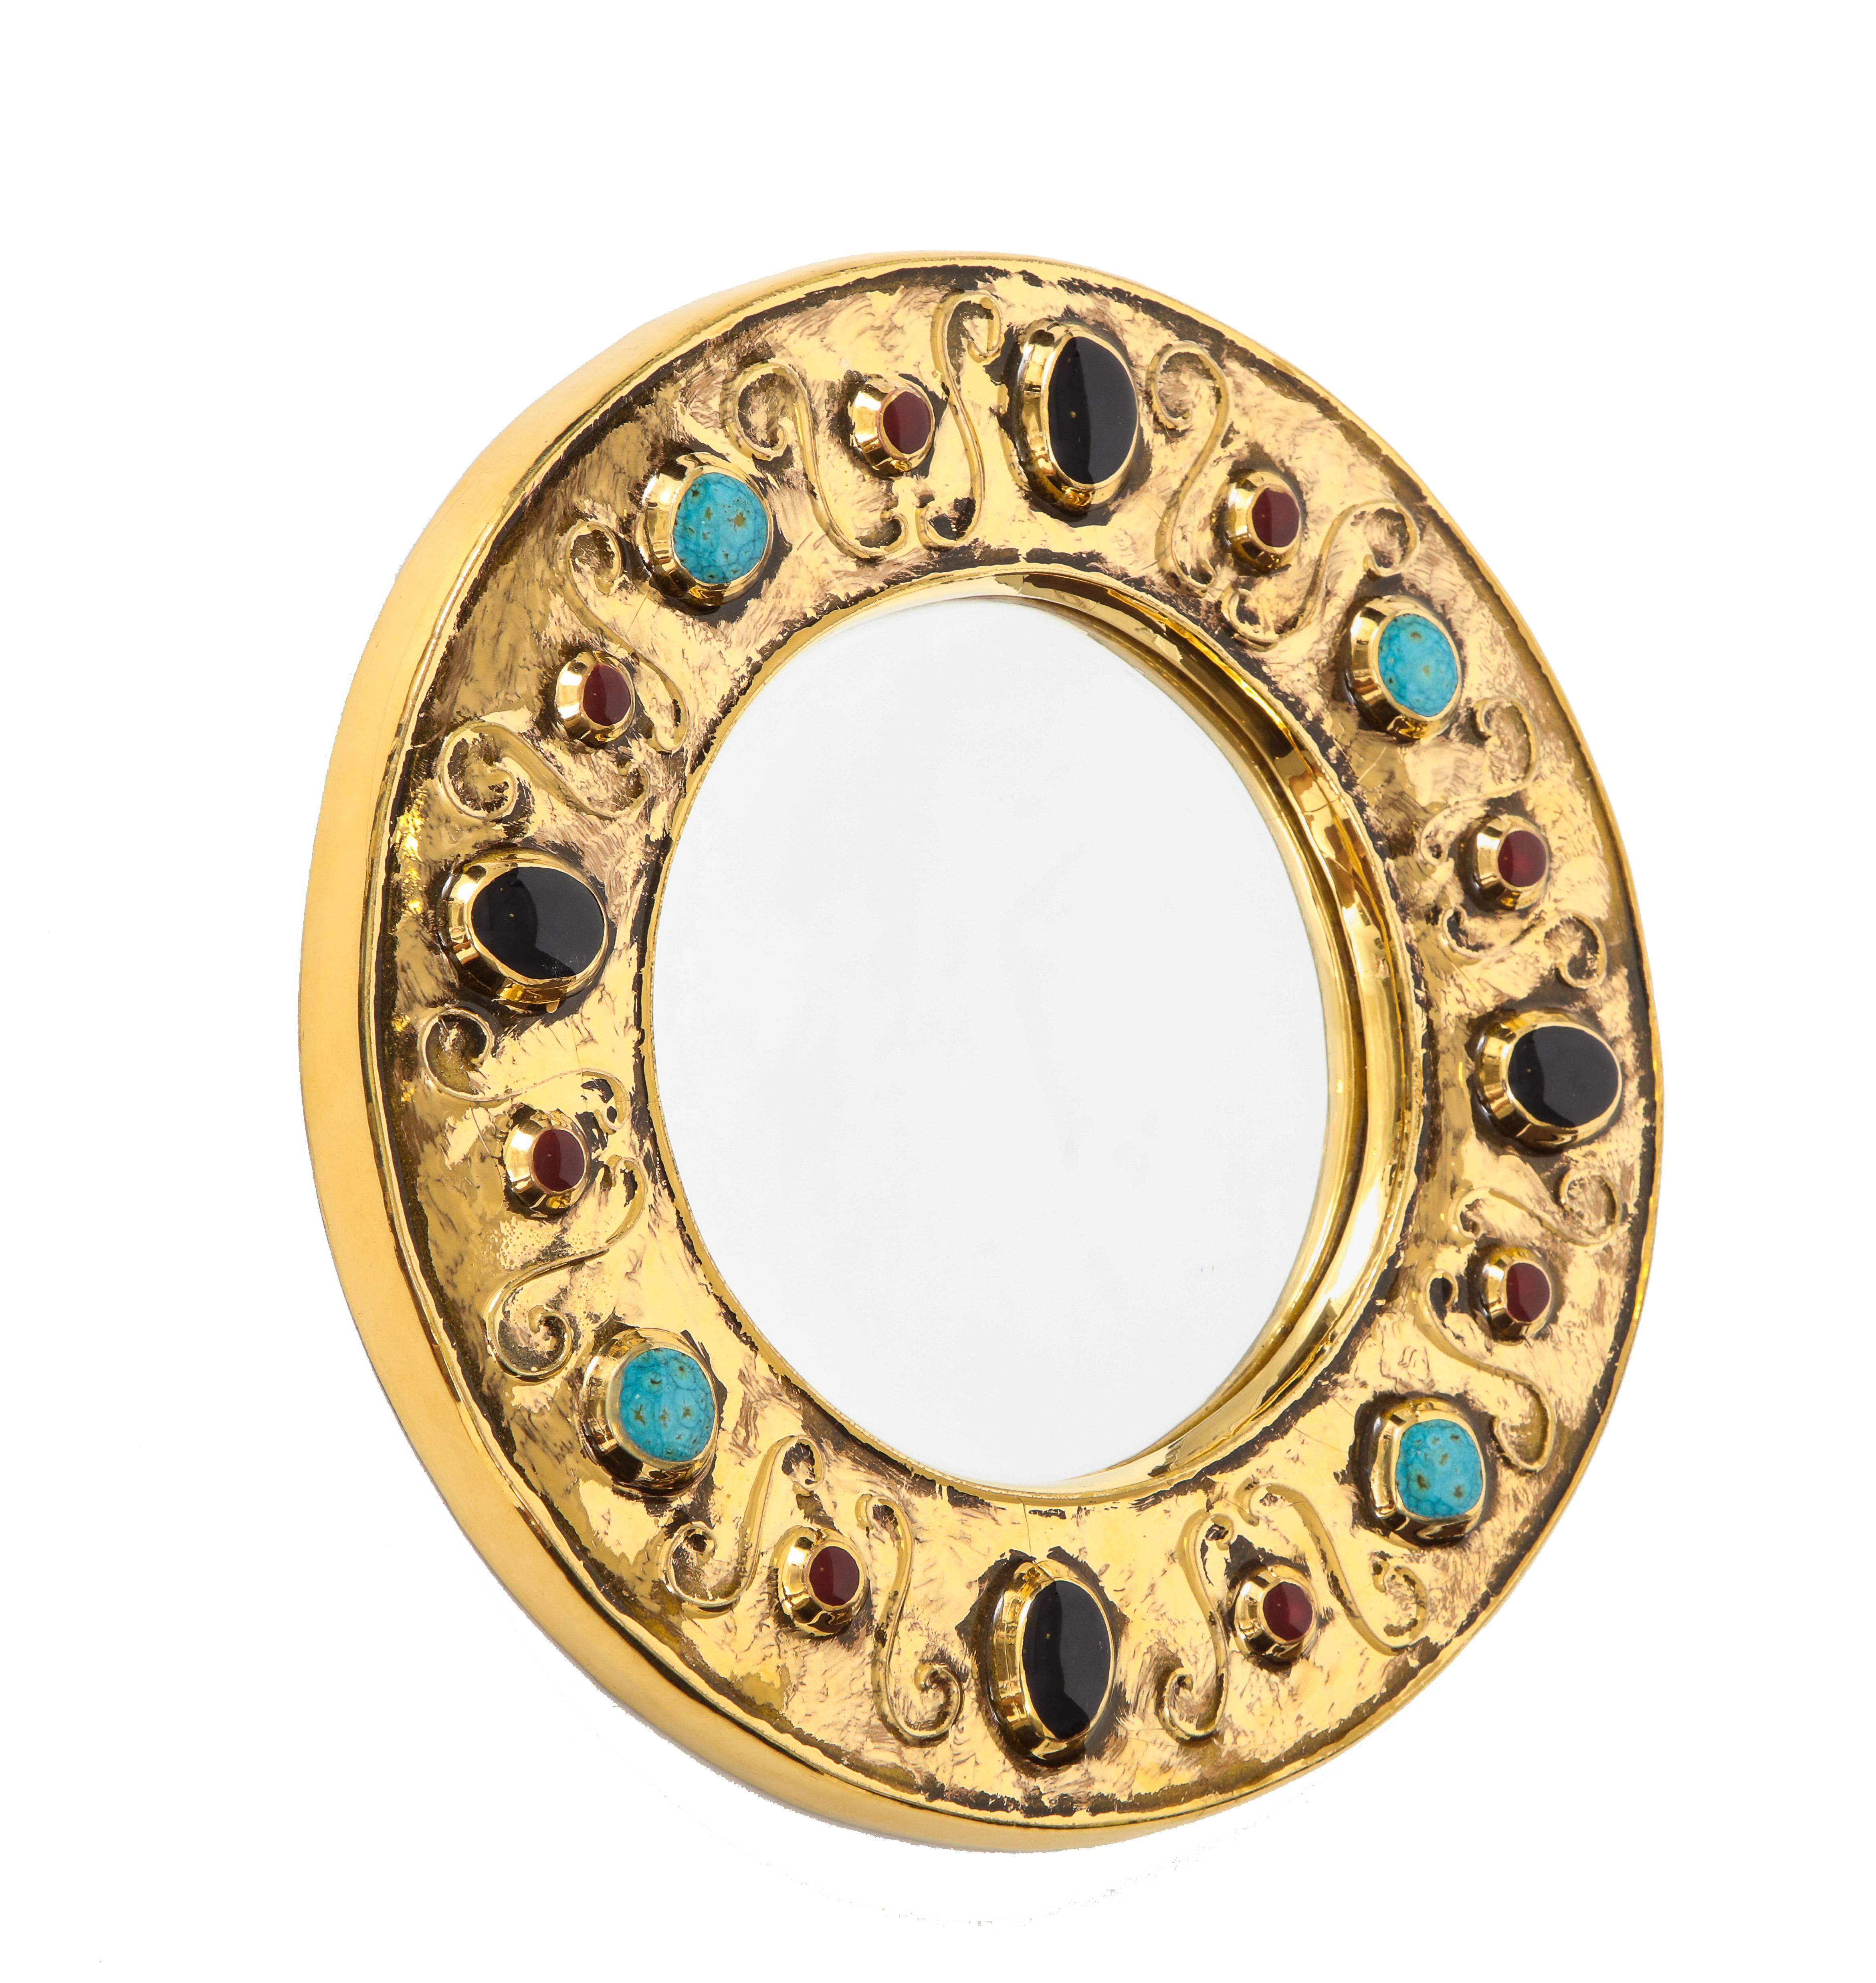 François Lembo mirror, ceramic, jeweled, gold, turquoise, black, ruby, signed. Medium scale gold glazed mirror with jewel decorations in an alternating patterns of black, ruby, turquoise. Signed: F. Lembo on the back of the mirror.

A native of